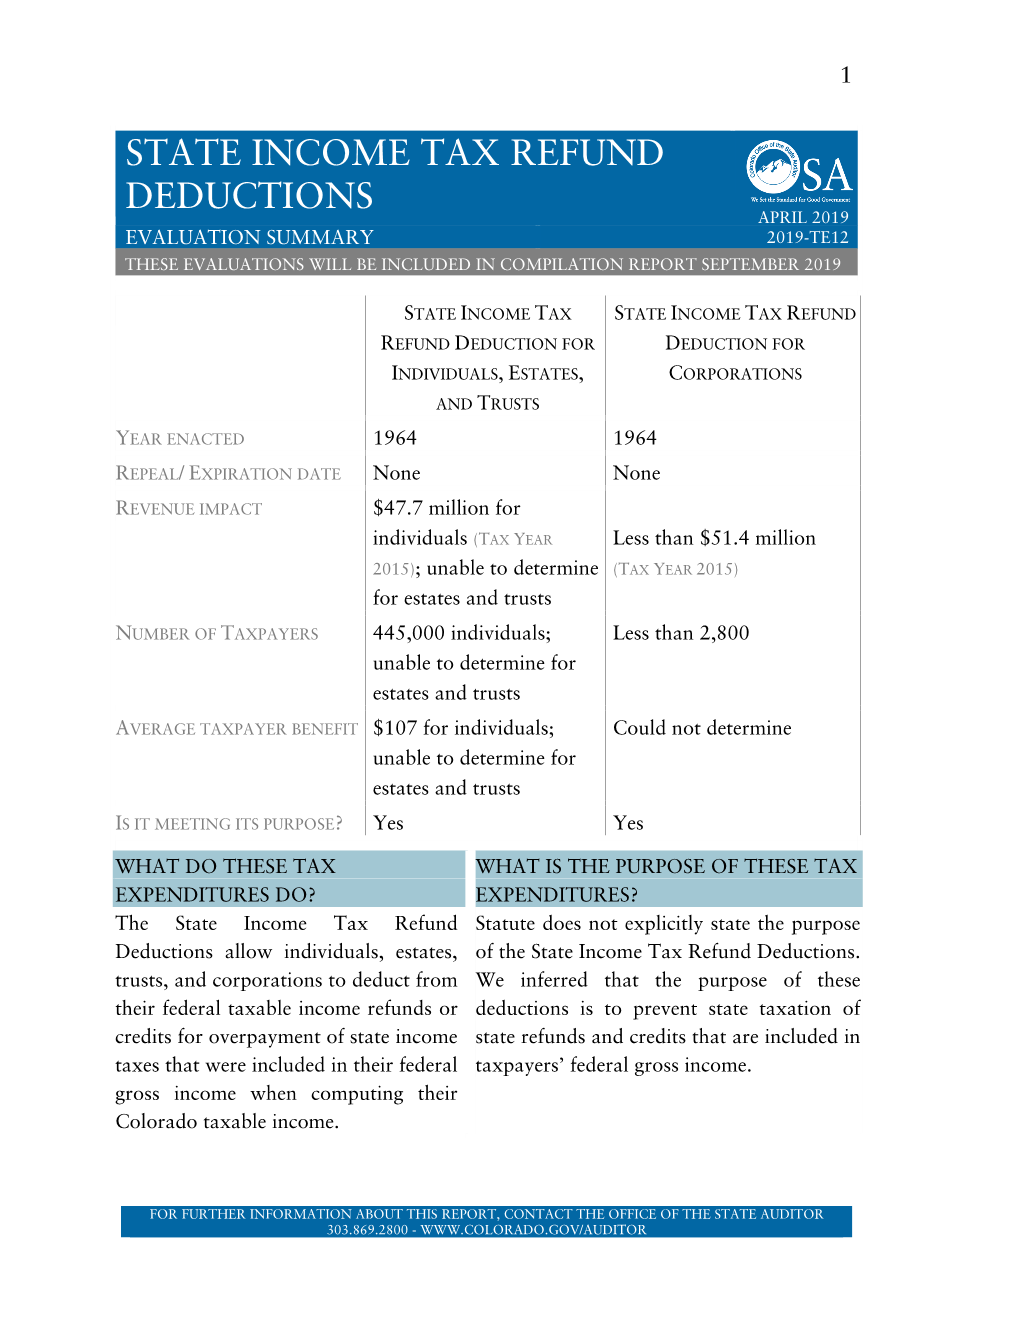 State Income Tax Refund Deductions April 2019 Evaluation Summary 2019-Te12 These Evaluations Will Be Included in Compilation Report September 2019